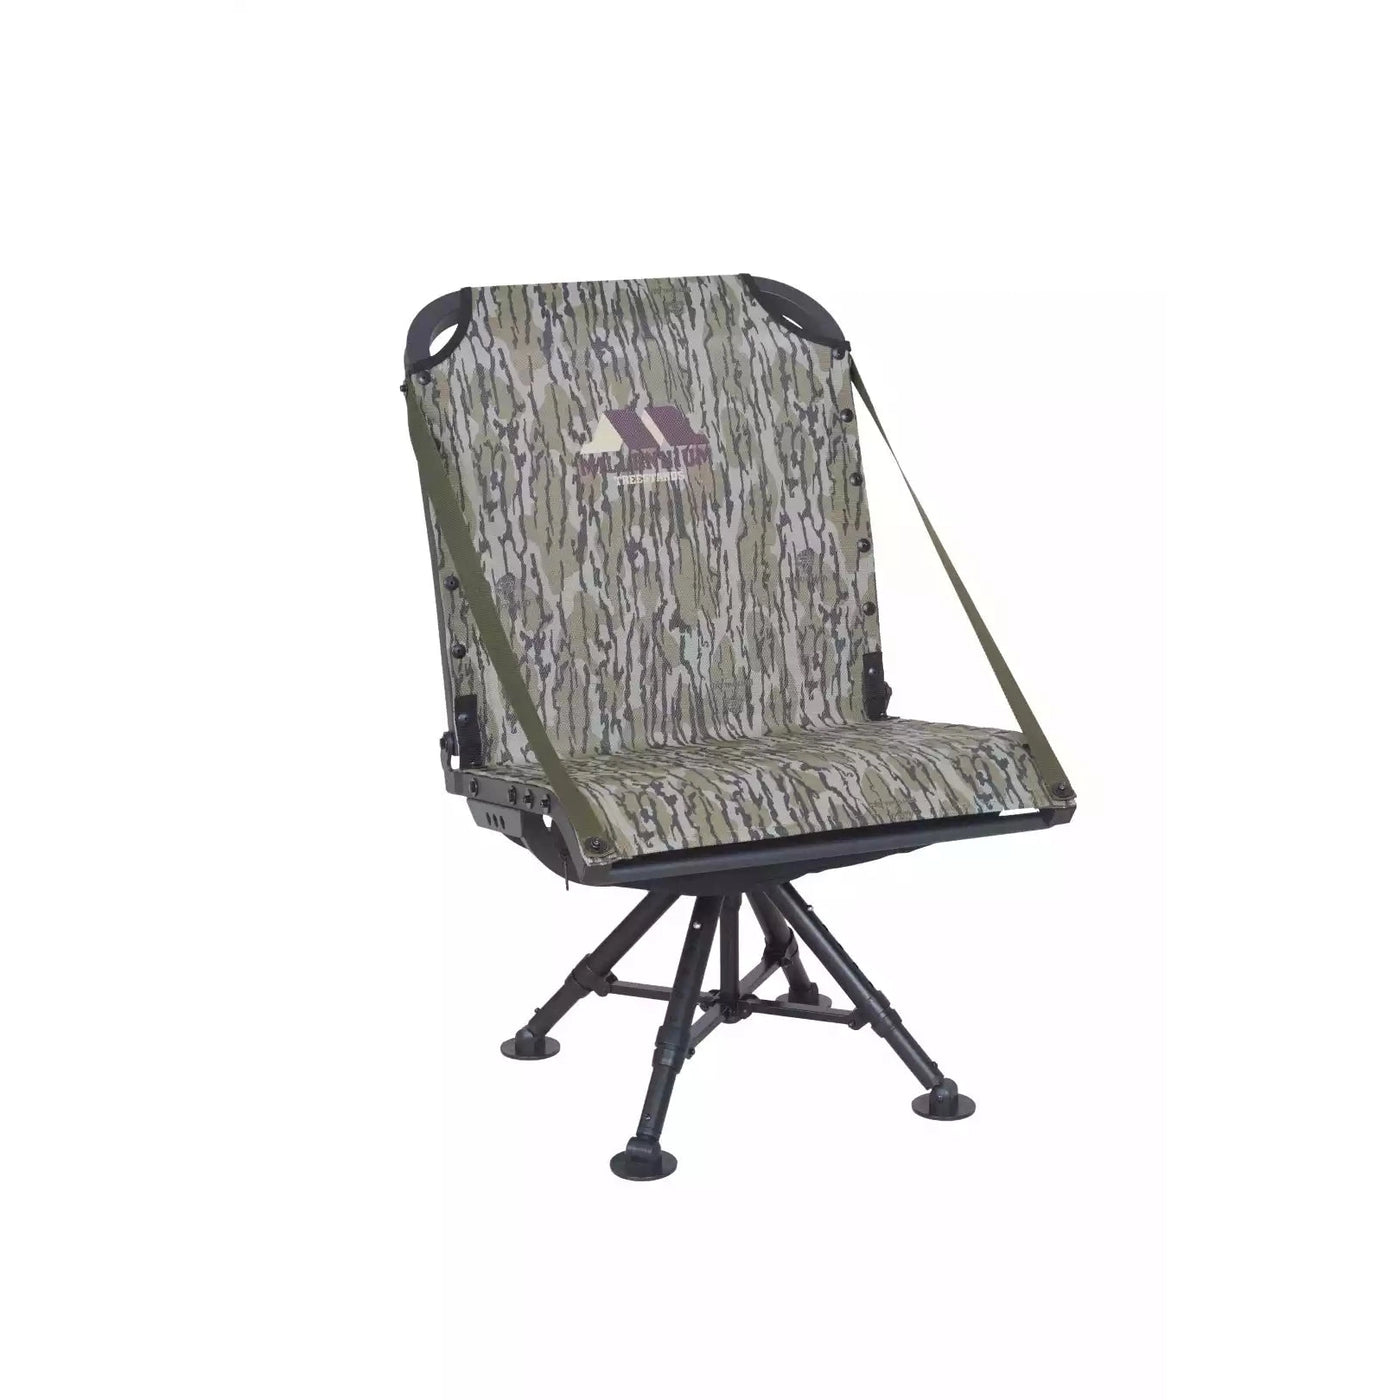 Millennium G450 Ground Blind Chair-Hunting/Outdoors-Bottomland-Kevin's Fine Outdoor Gear & Apparel